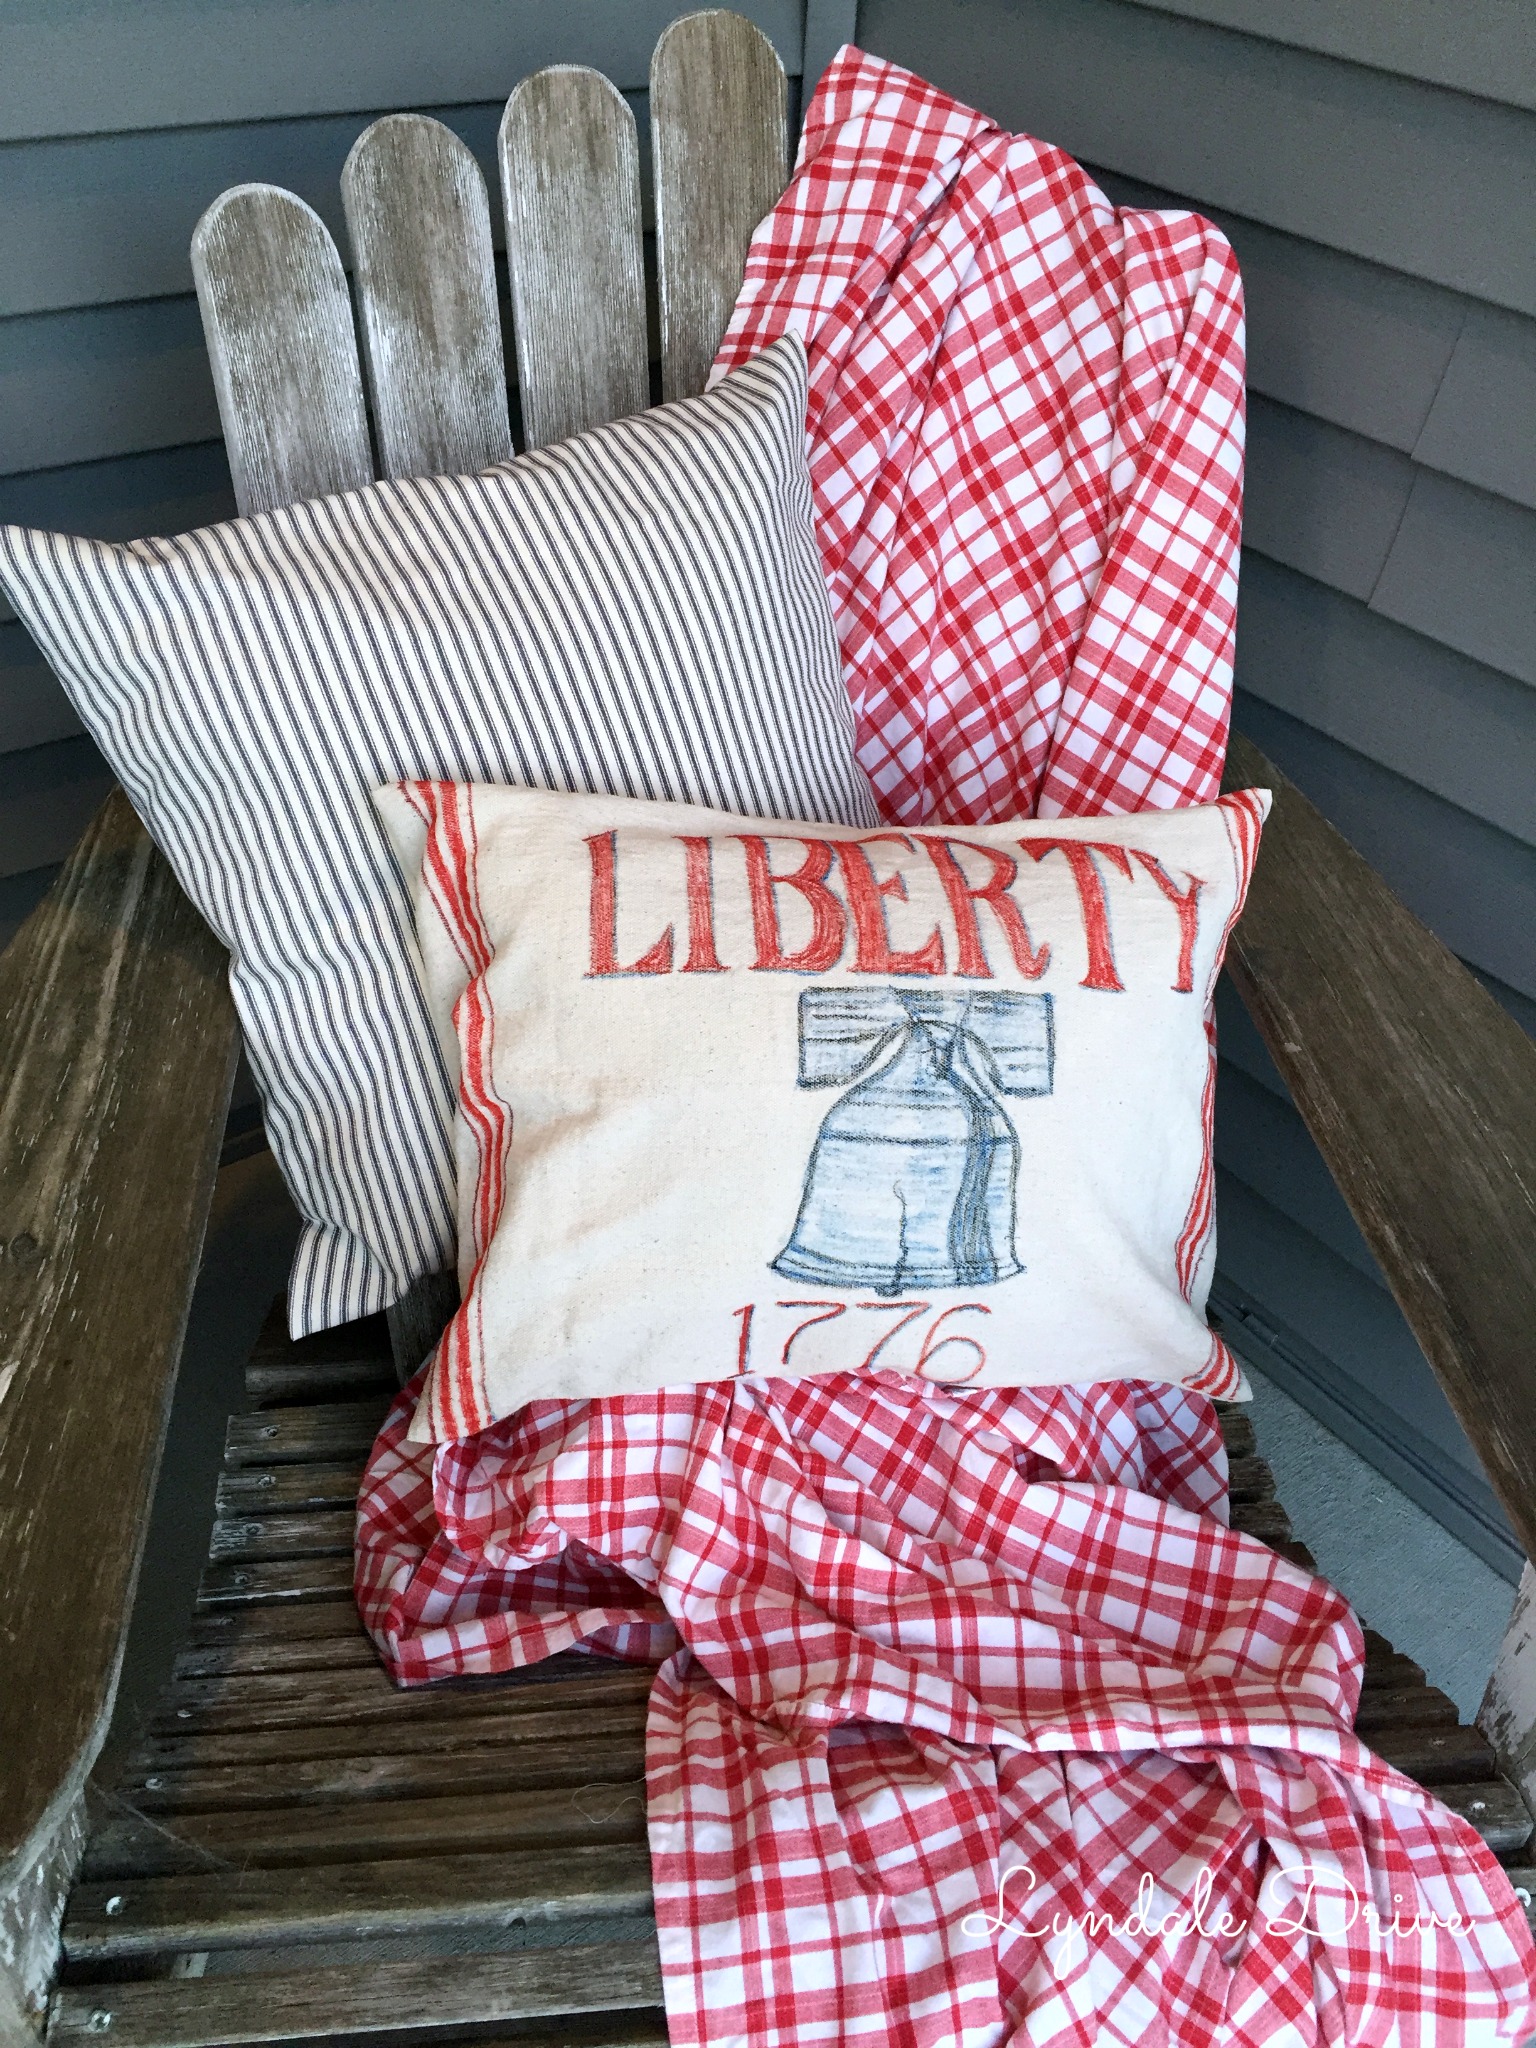 Make your own throw pillow covers, easy and inexpensive!